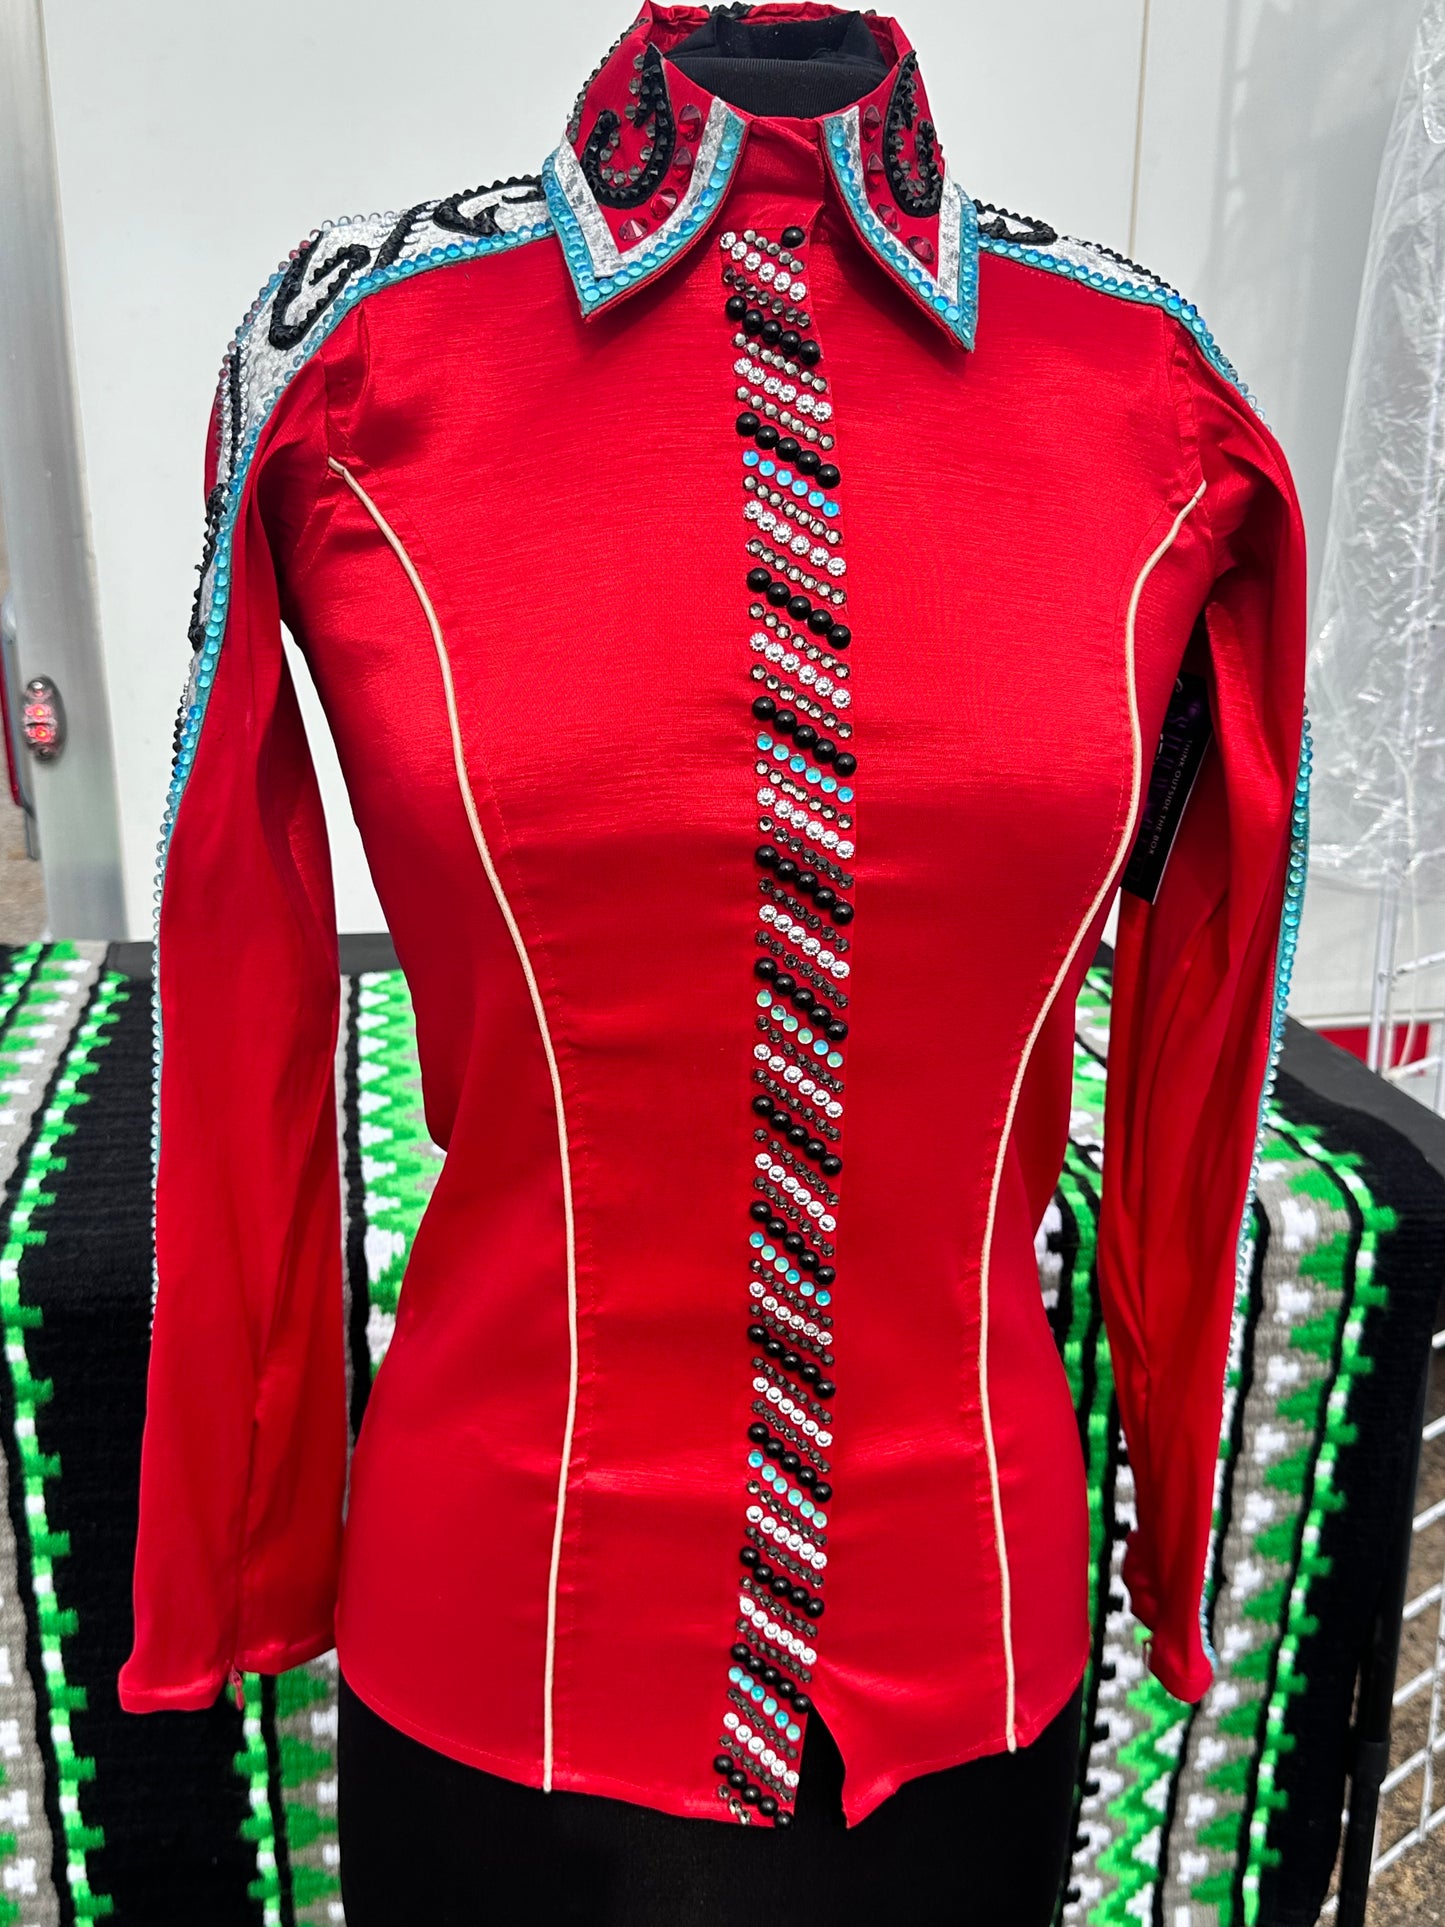 XS day shirt stretch taffeta red with aqua, black and silver accents